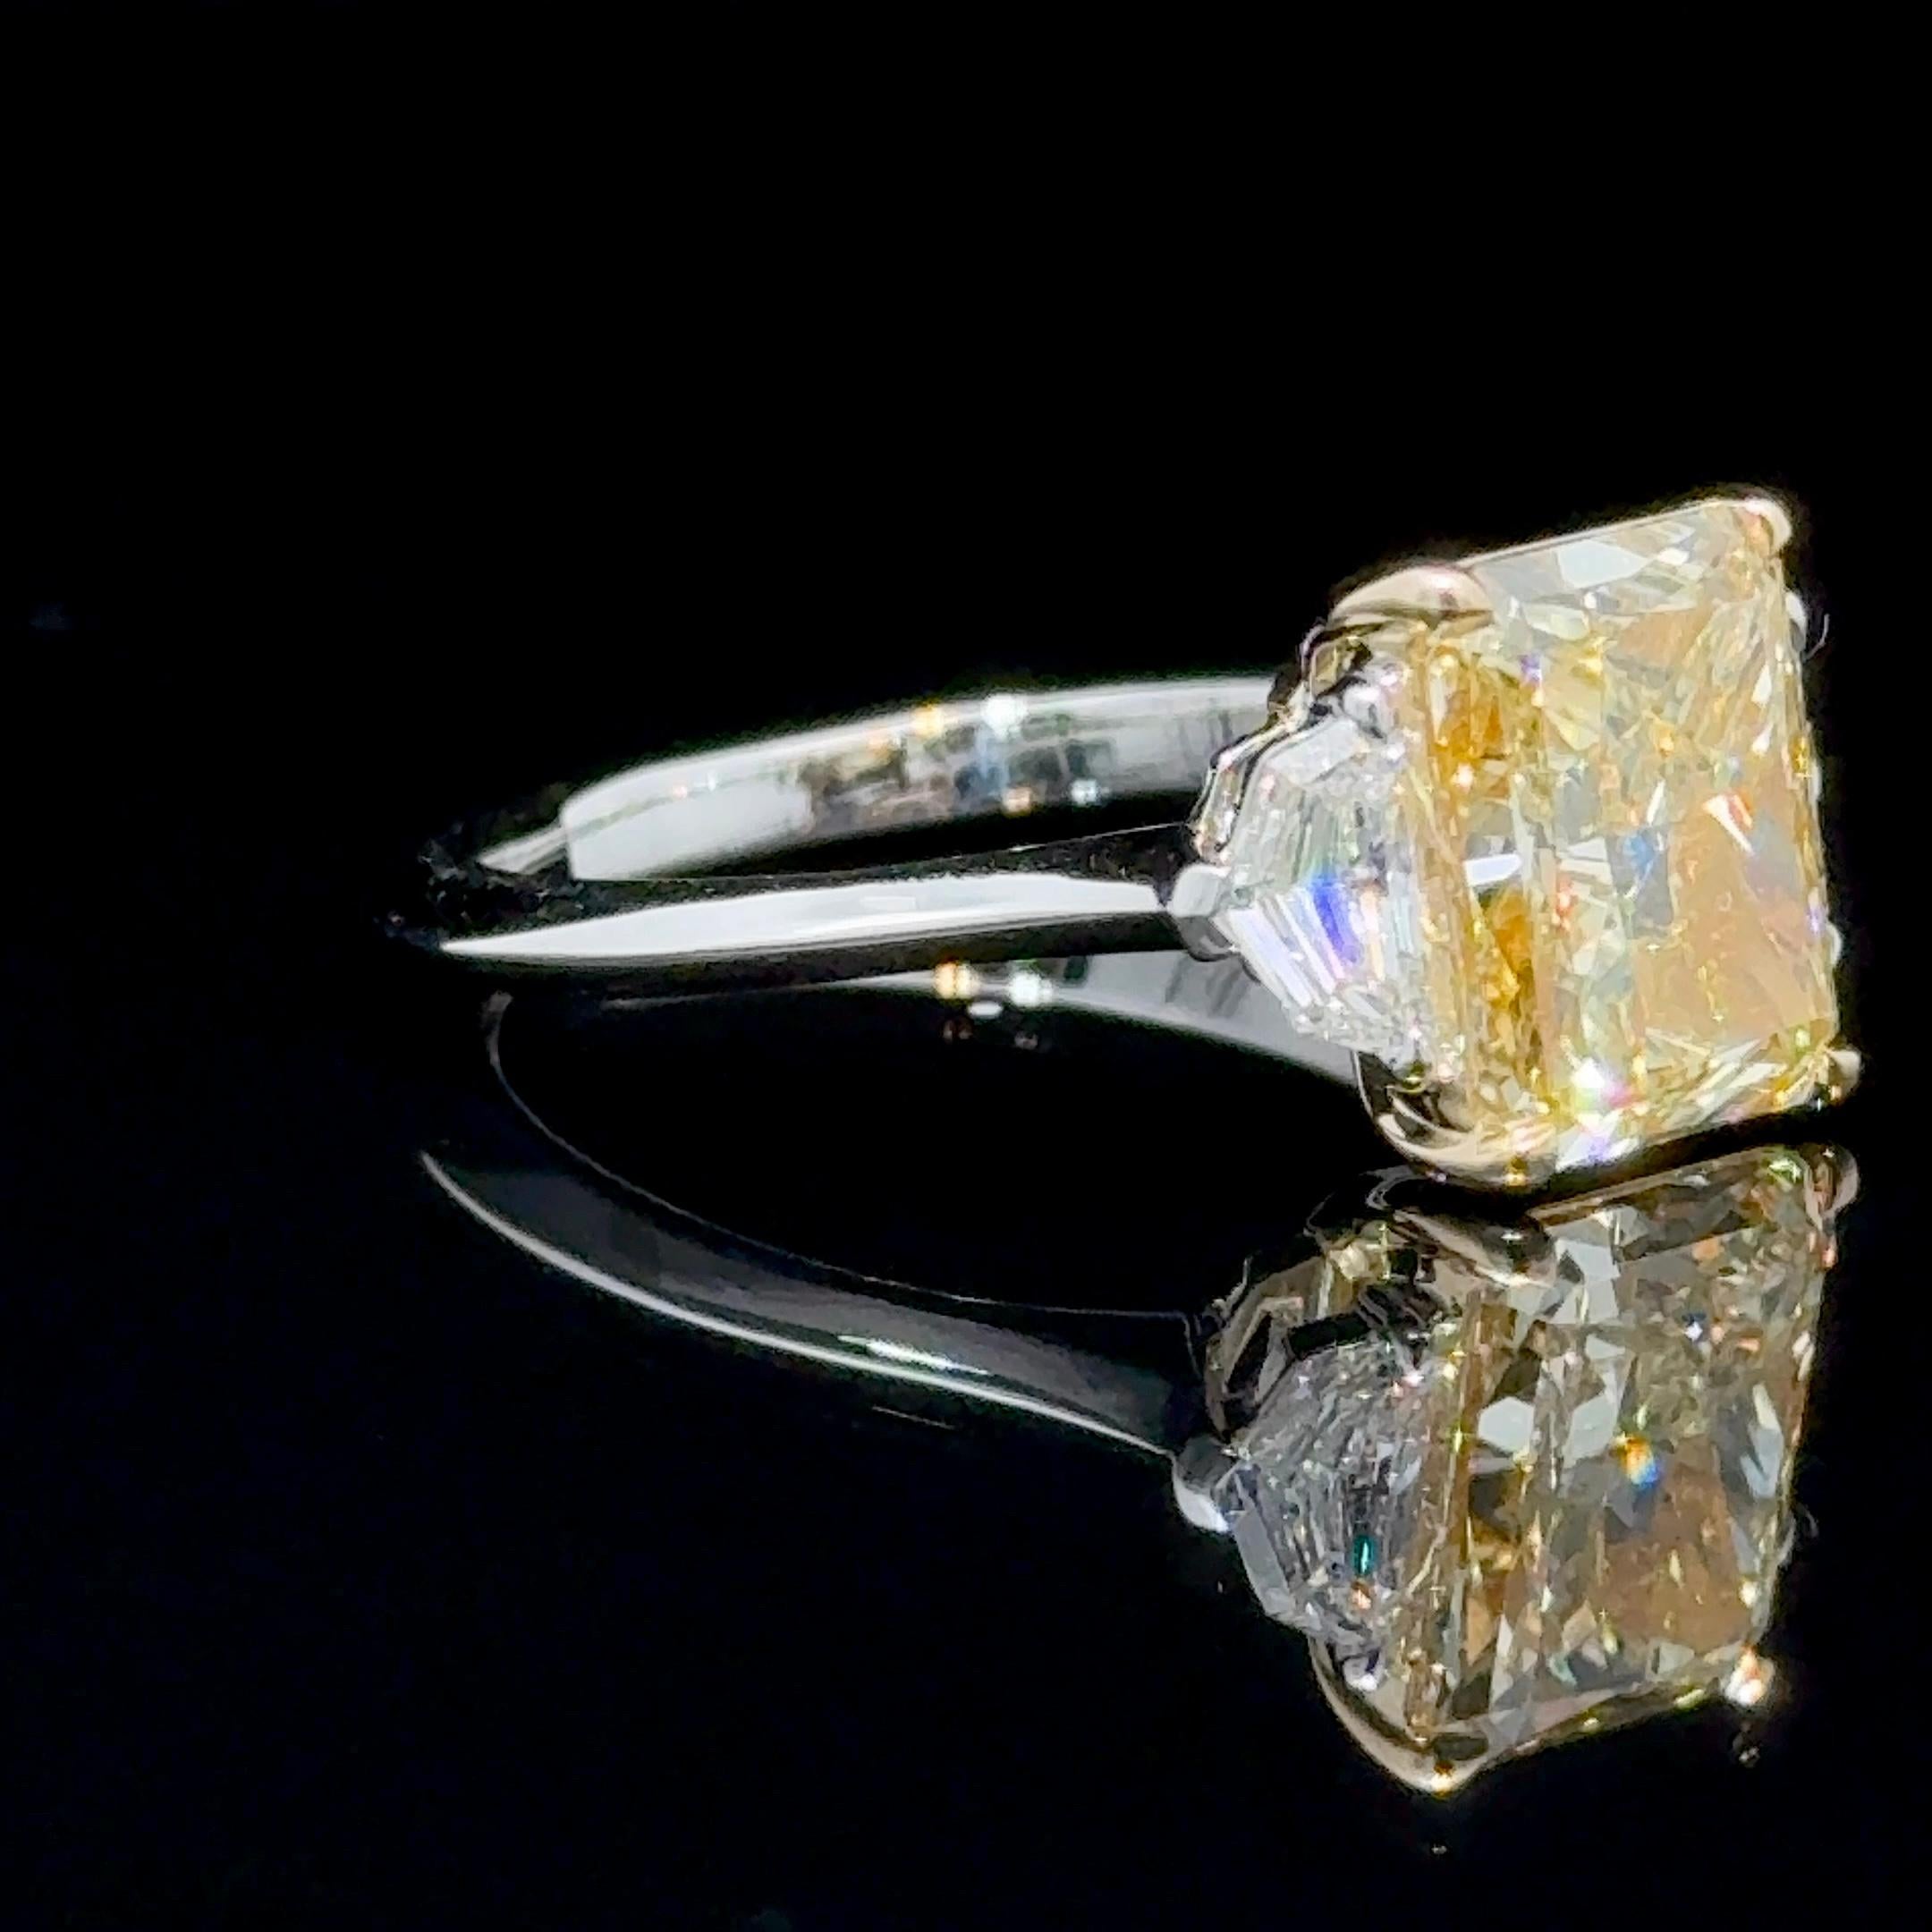 A perfectly cut GIA Certified 3.04 Carat Radiant Cut Fancy Yellow Diamond Three Stone Ring.
Featuring a GIA Graded 3.04 Rectangular Radiant Cut, Fancy Yellow, VS2 Clarity.
Excellent Polish, Excellent Symmetry, No fluorescence. Length to Width Ratio: